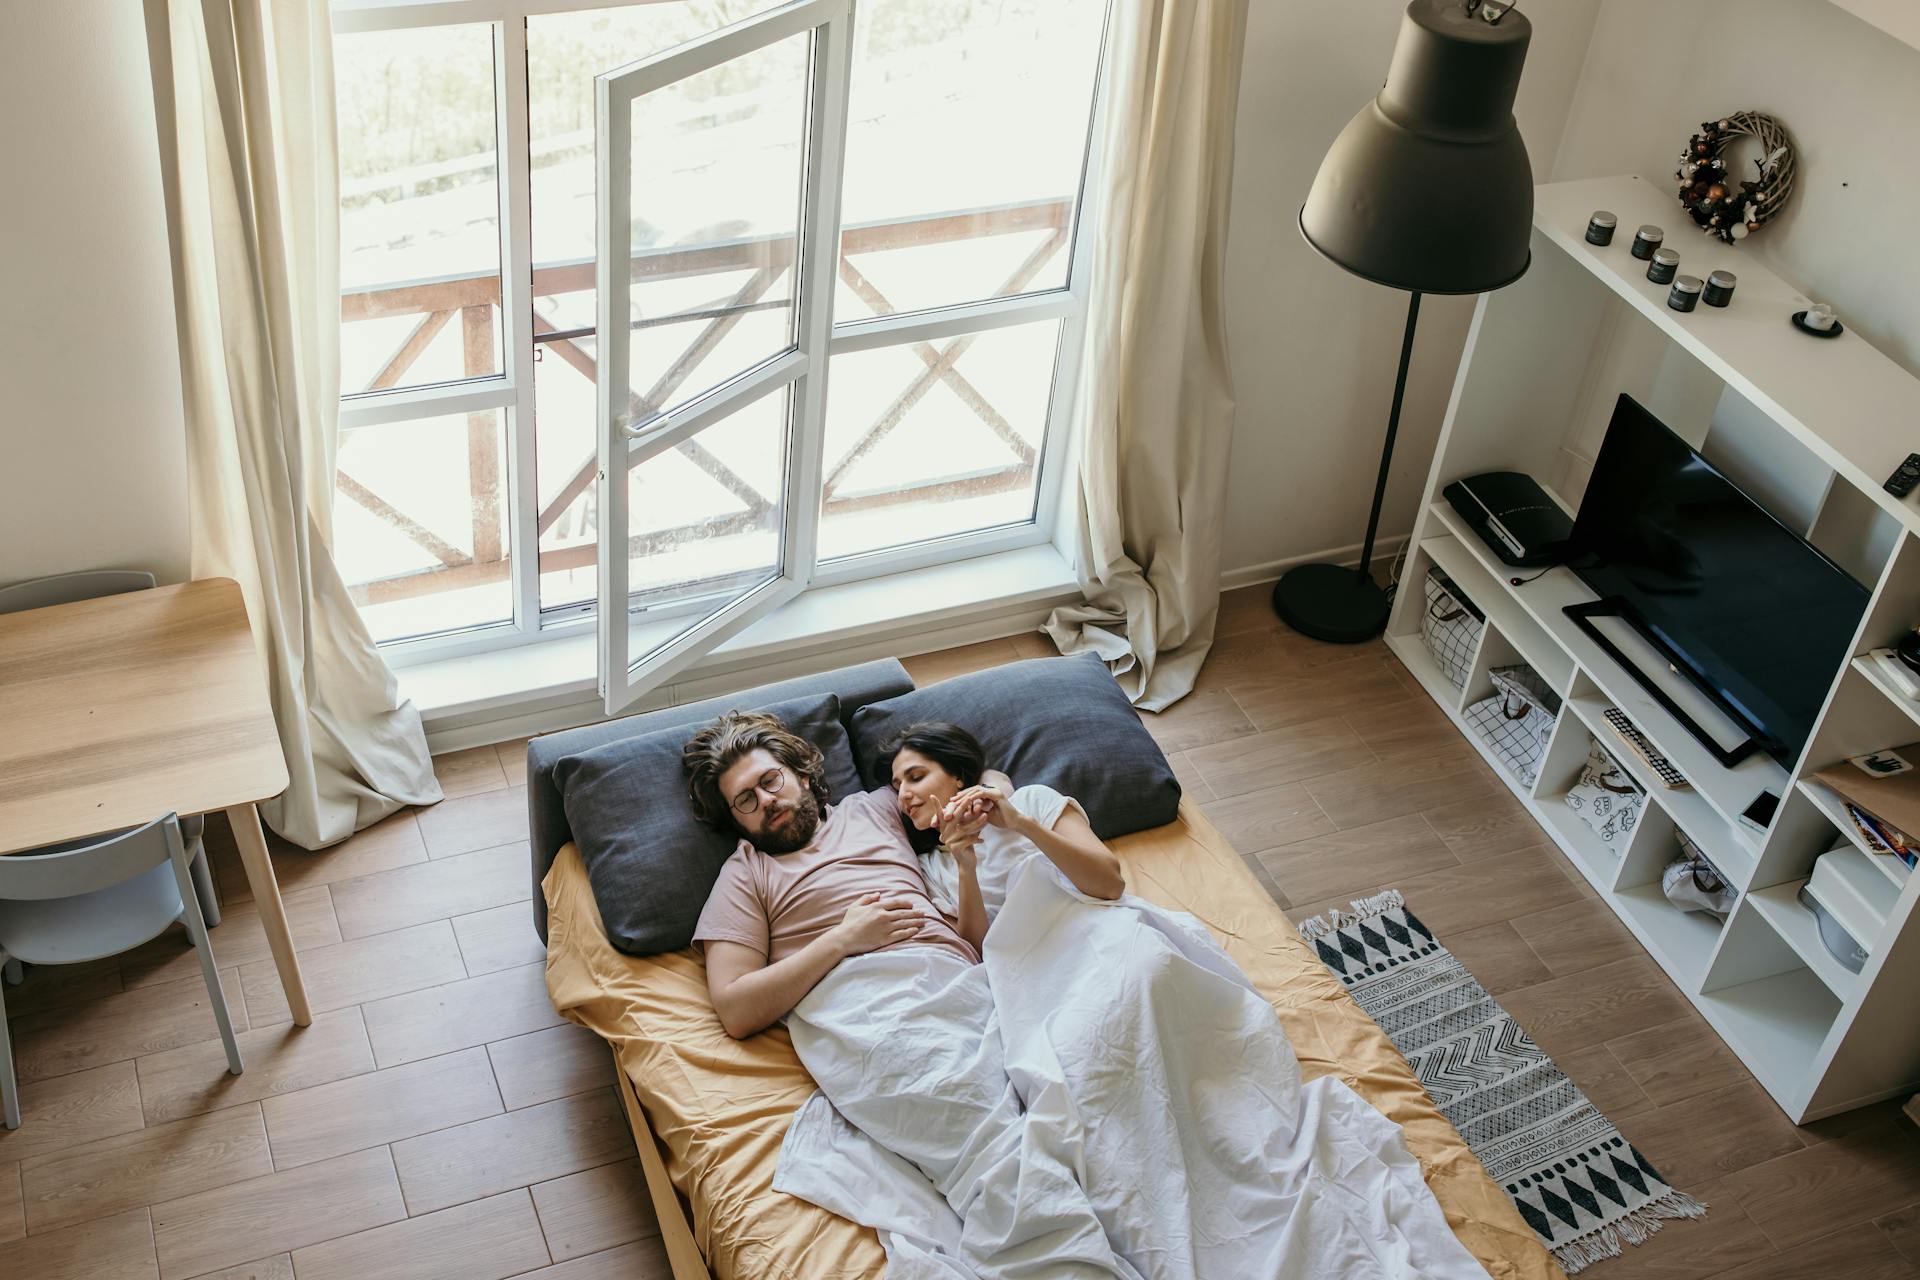 A couple lying in bed | Source: Pexels